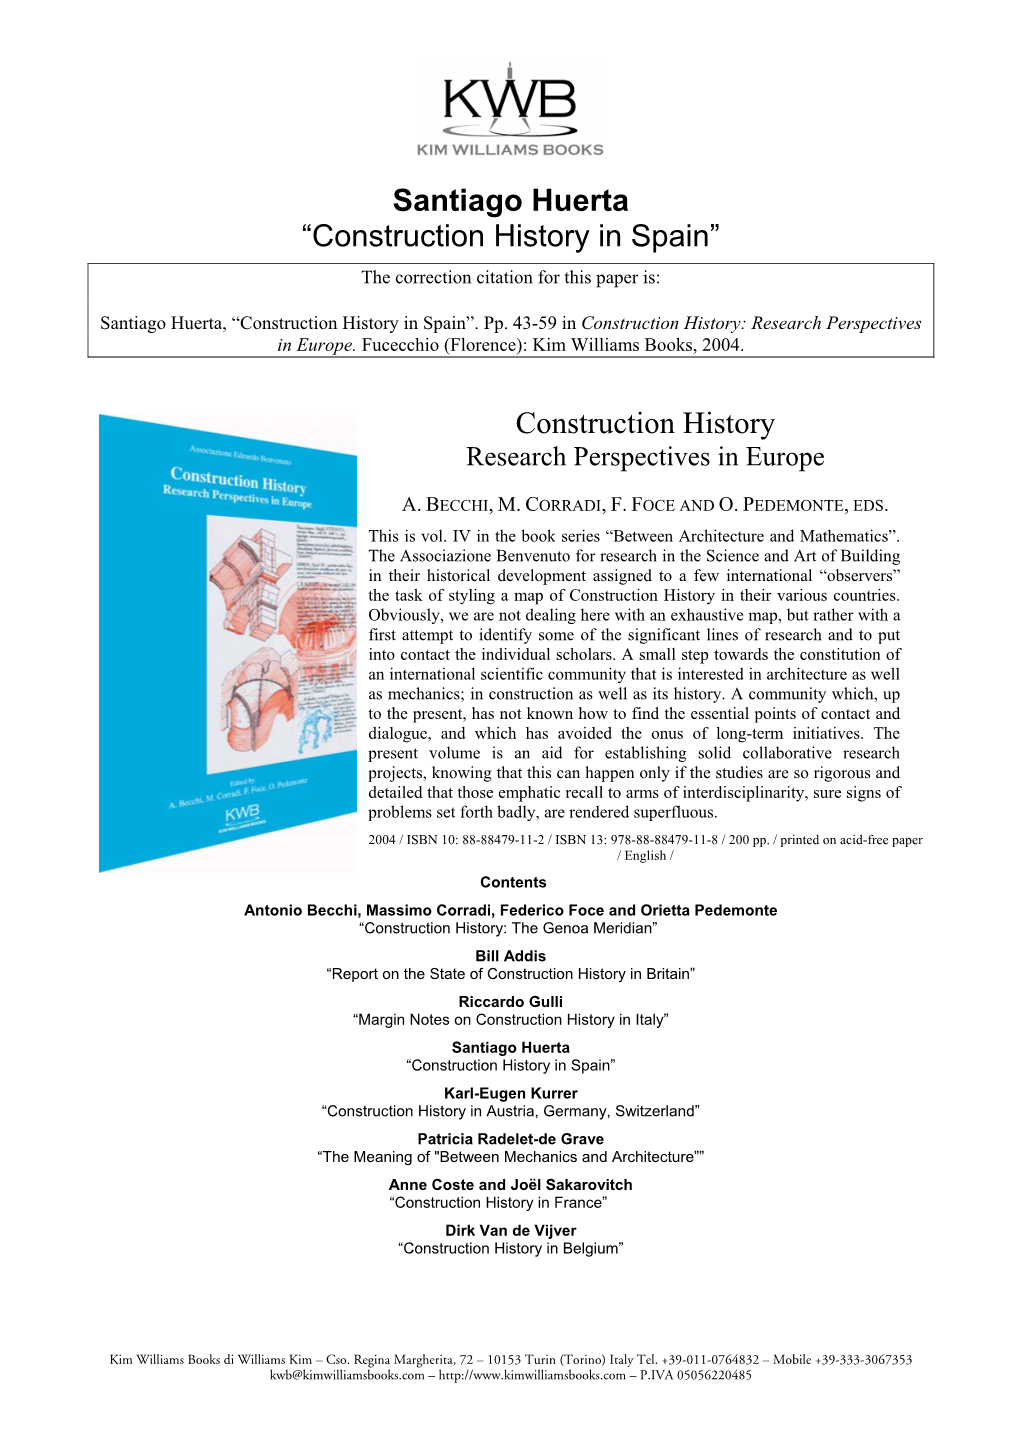 Construction History in Spain” the Correction Citation for This Paper Is